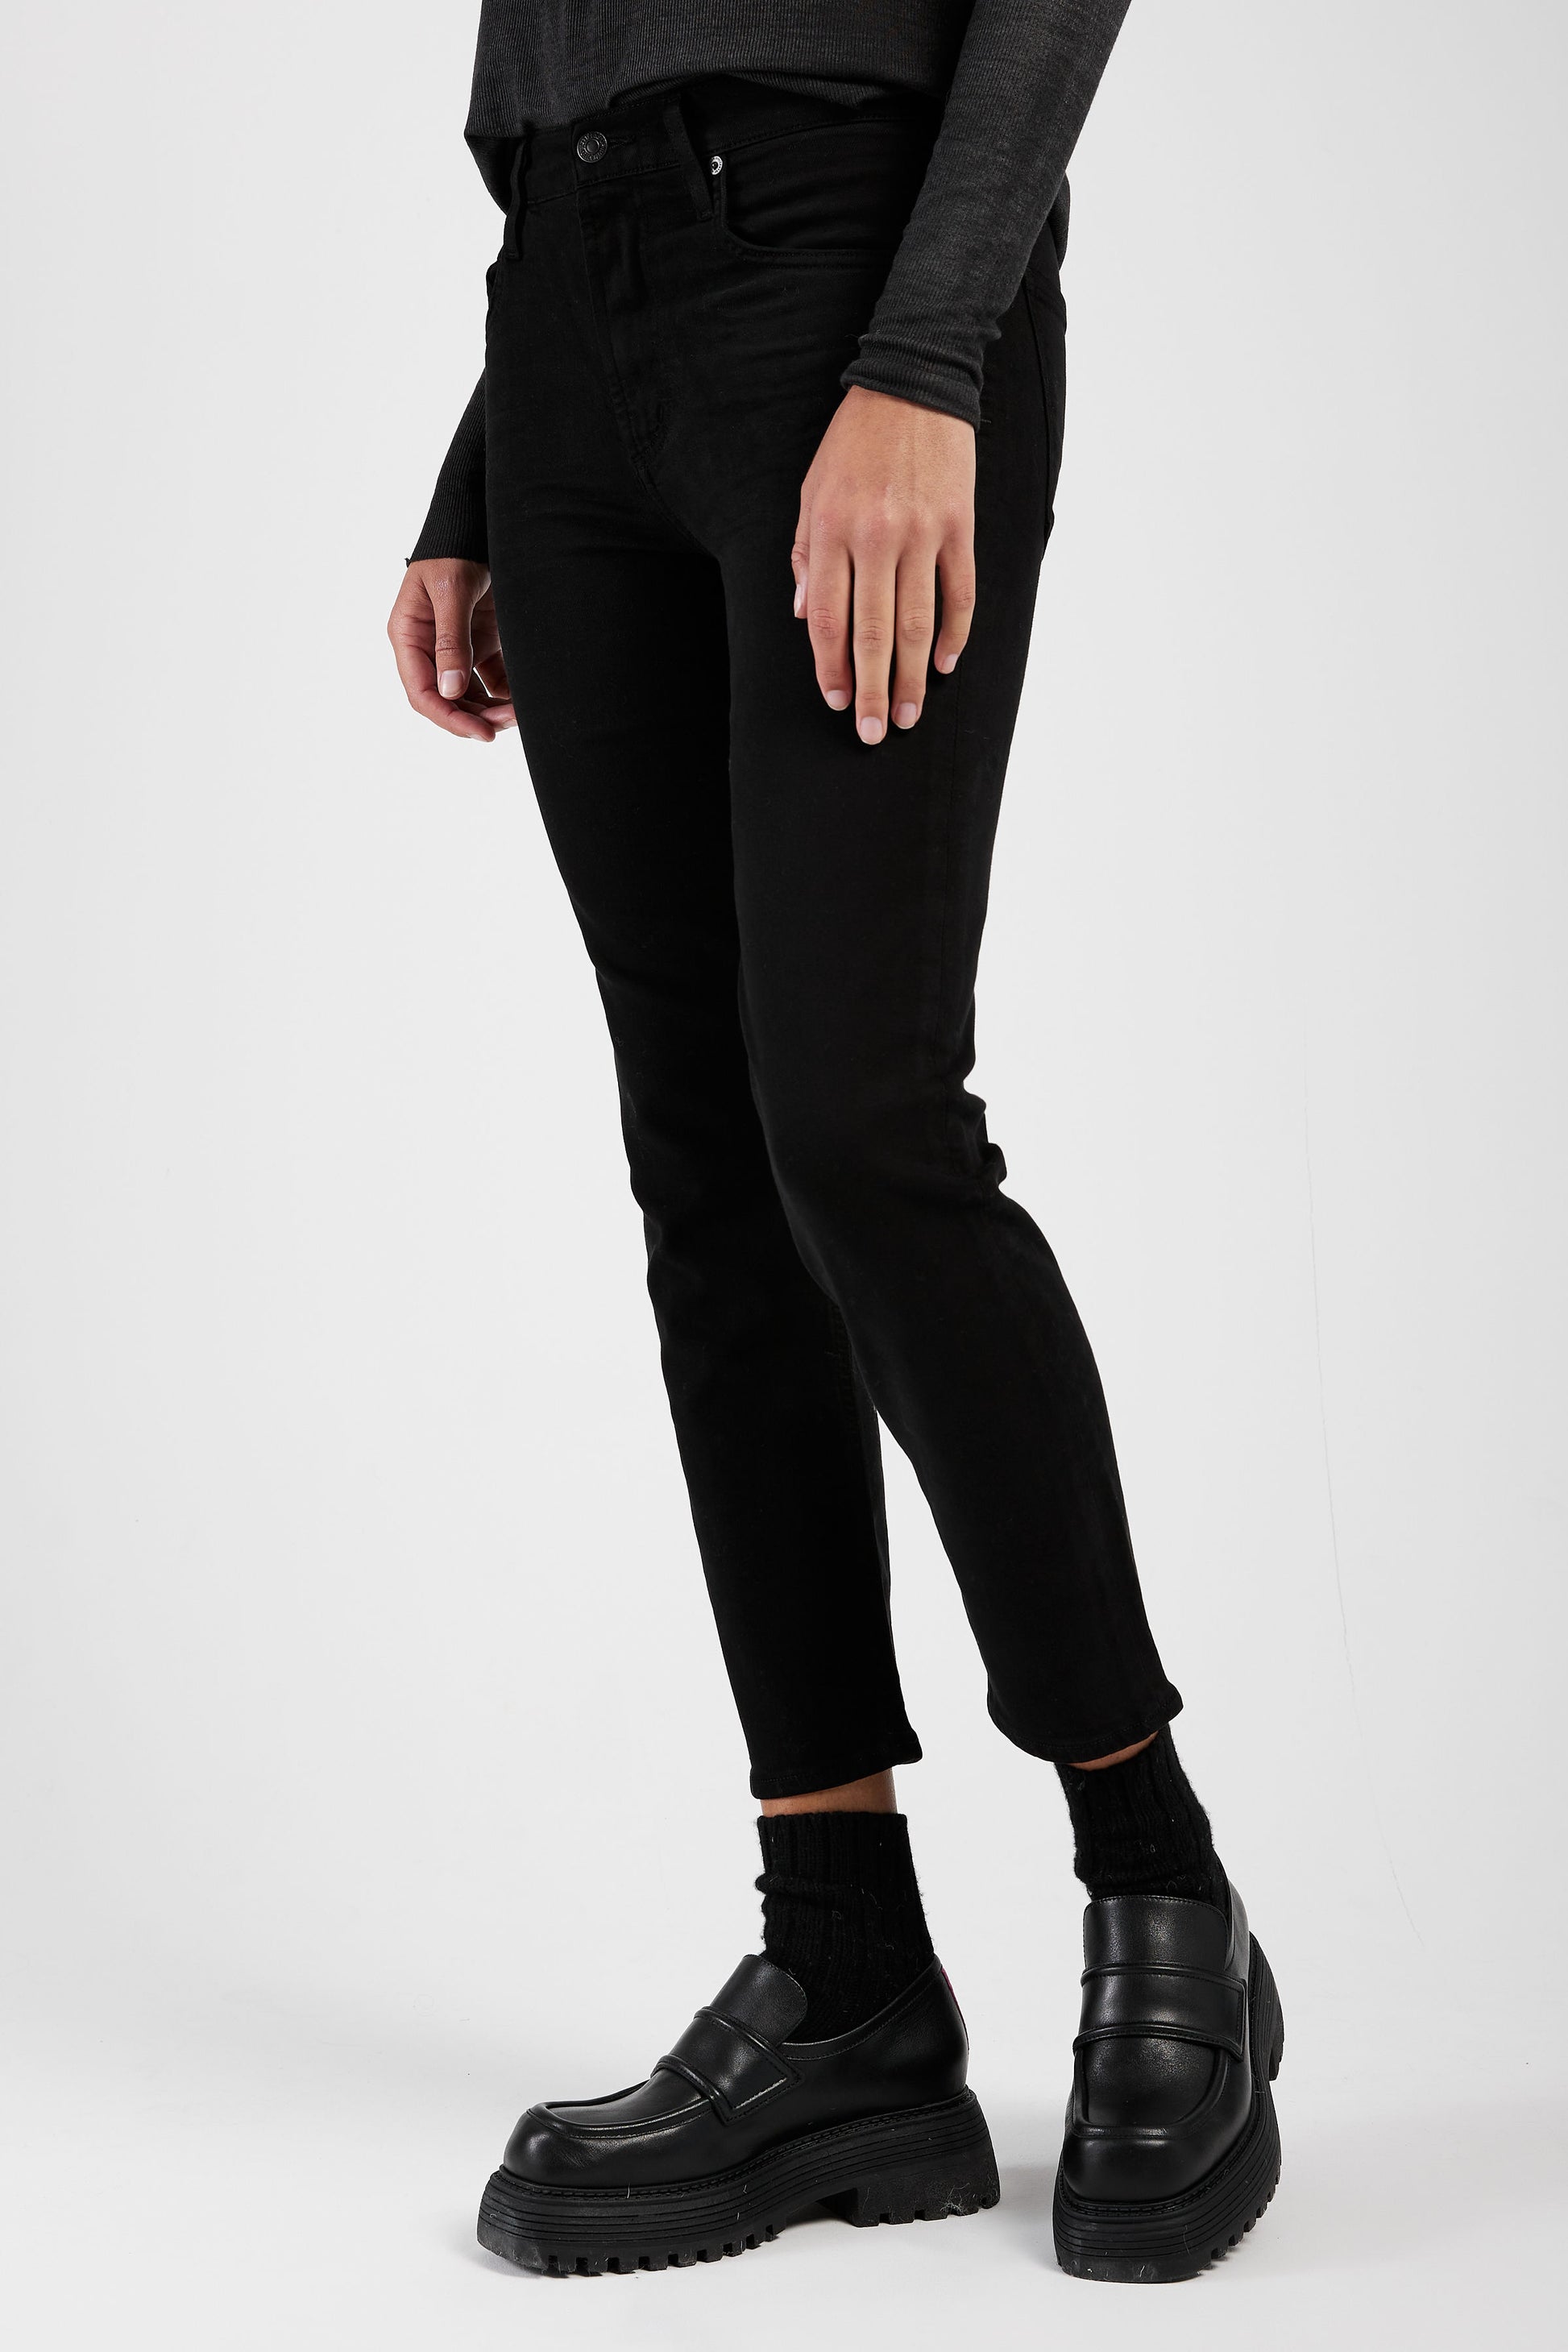 CITIZENS OF HUMANITY Isola Straight Crop Jean in Plush Black